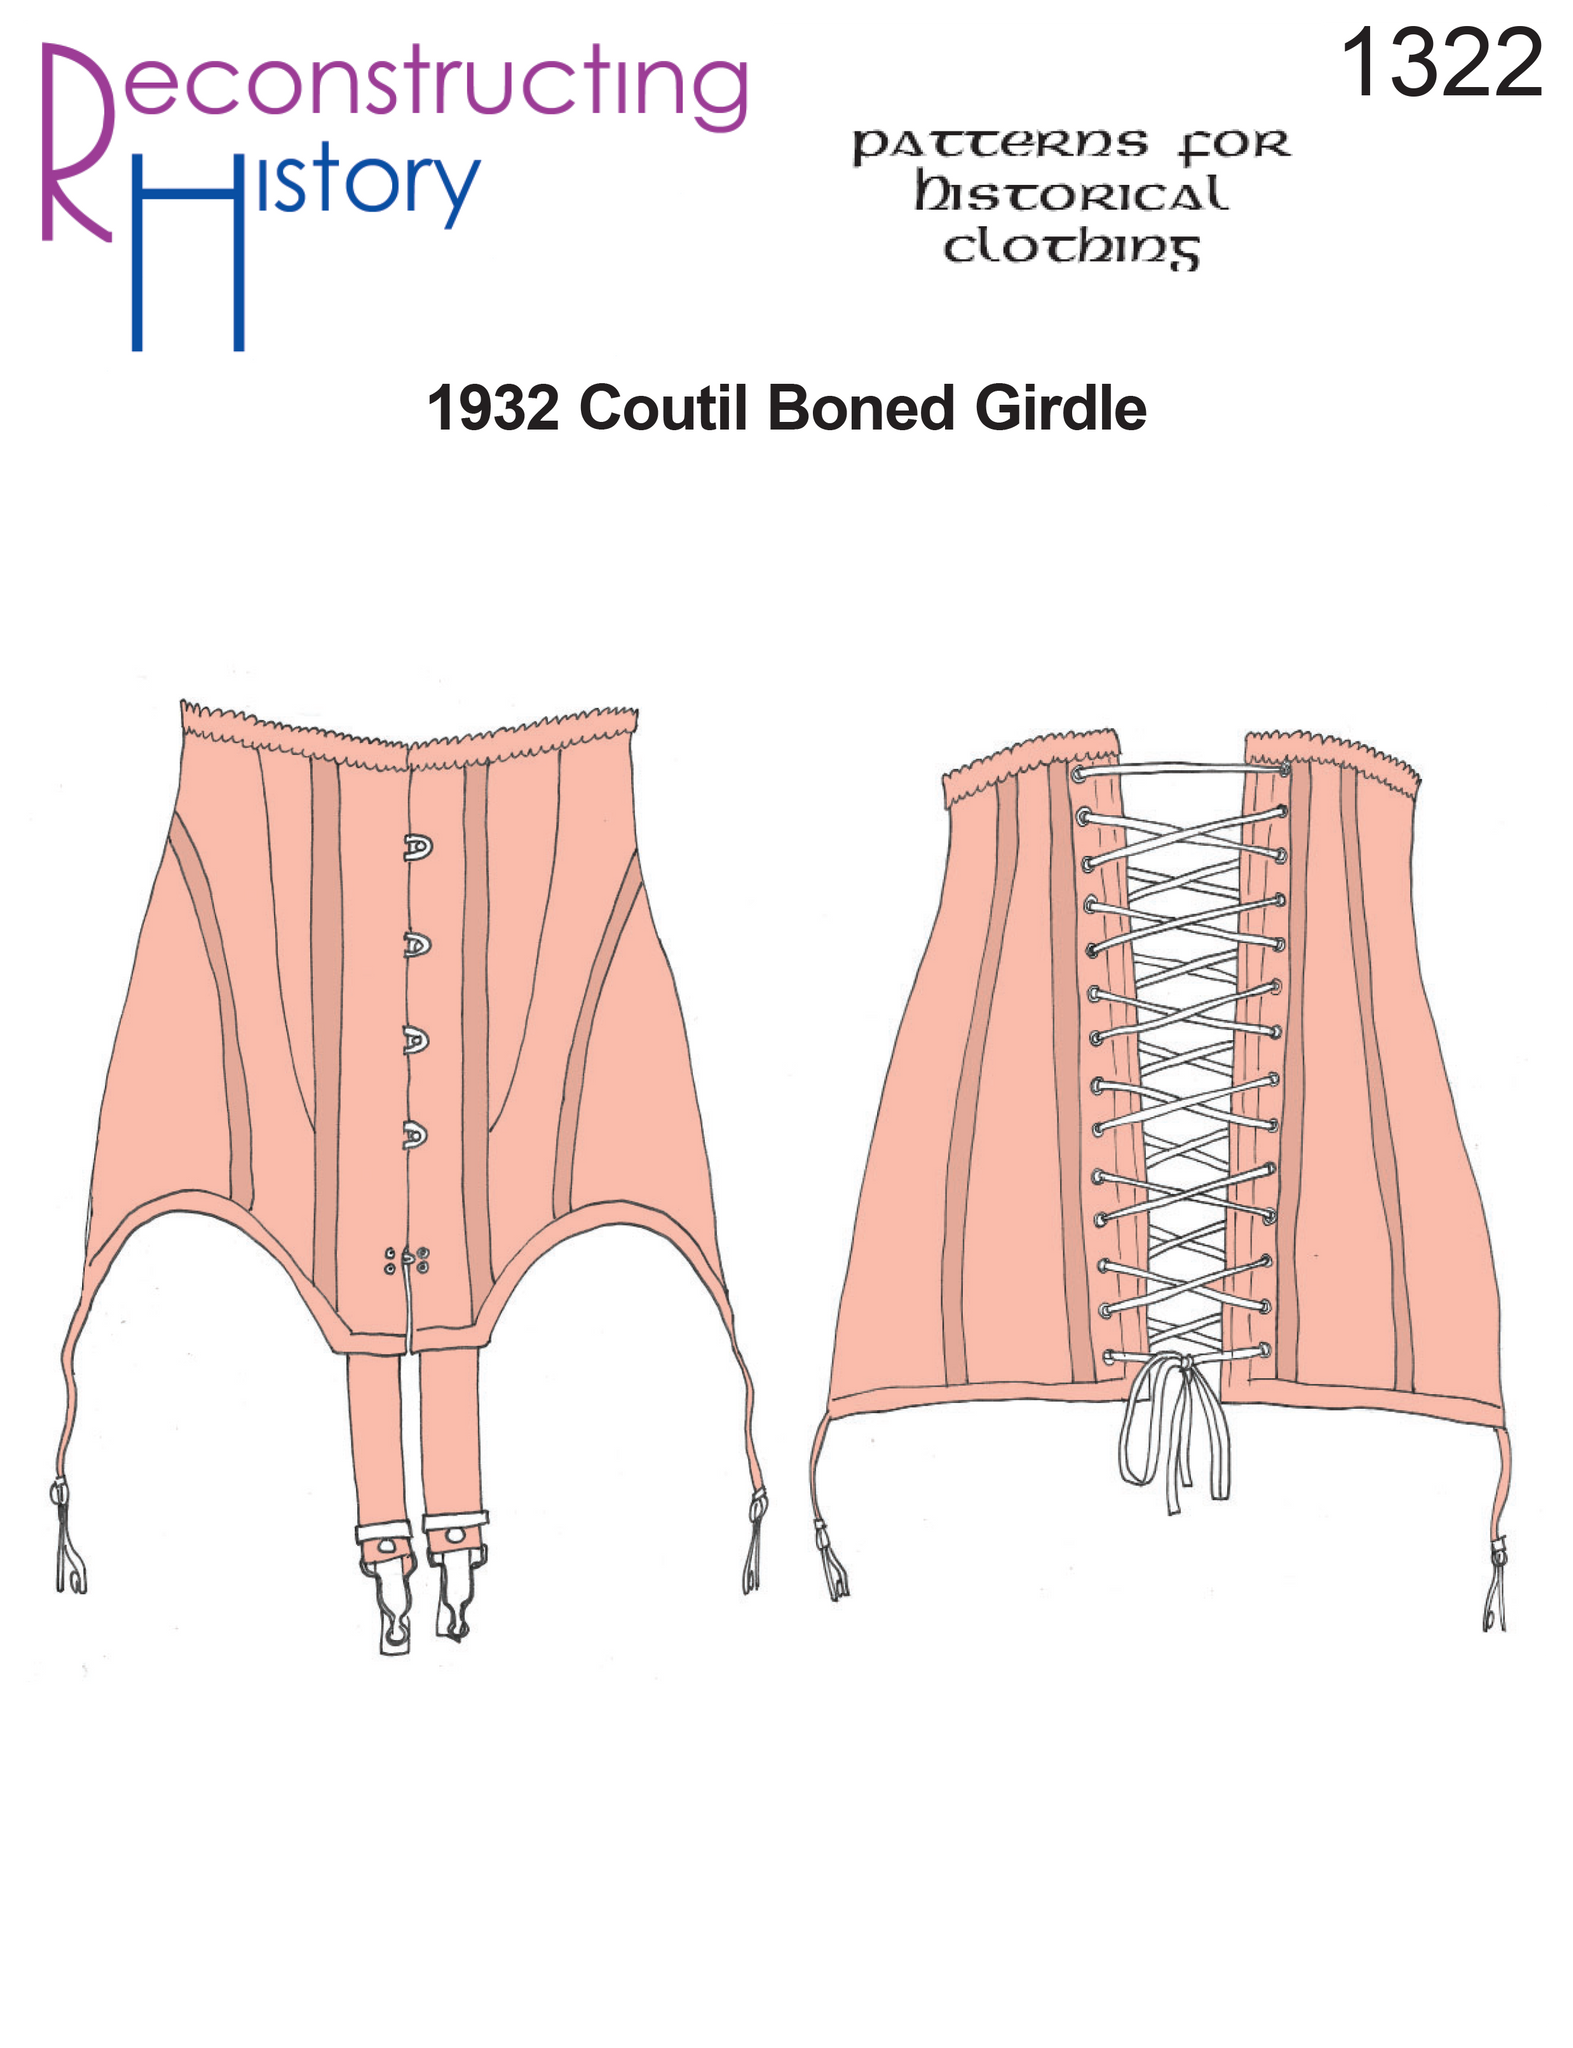 RH1322 — 1932 Coutil Boned Girdle sewing pattern – Reconstructing History